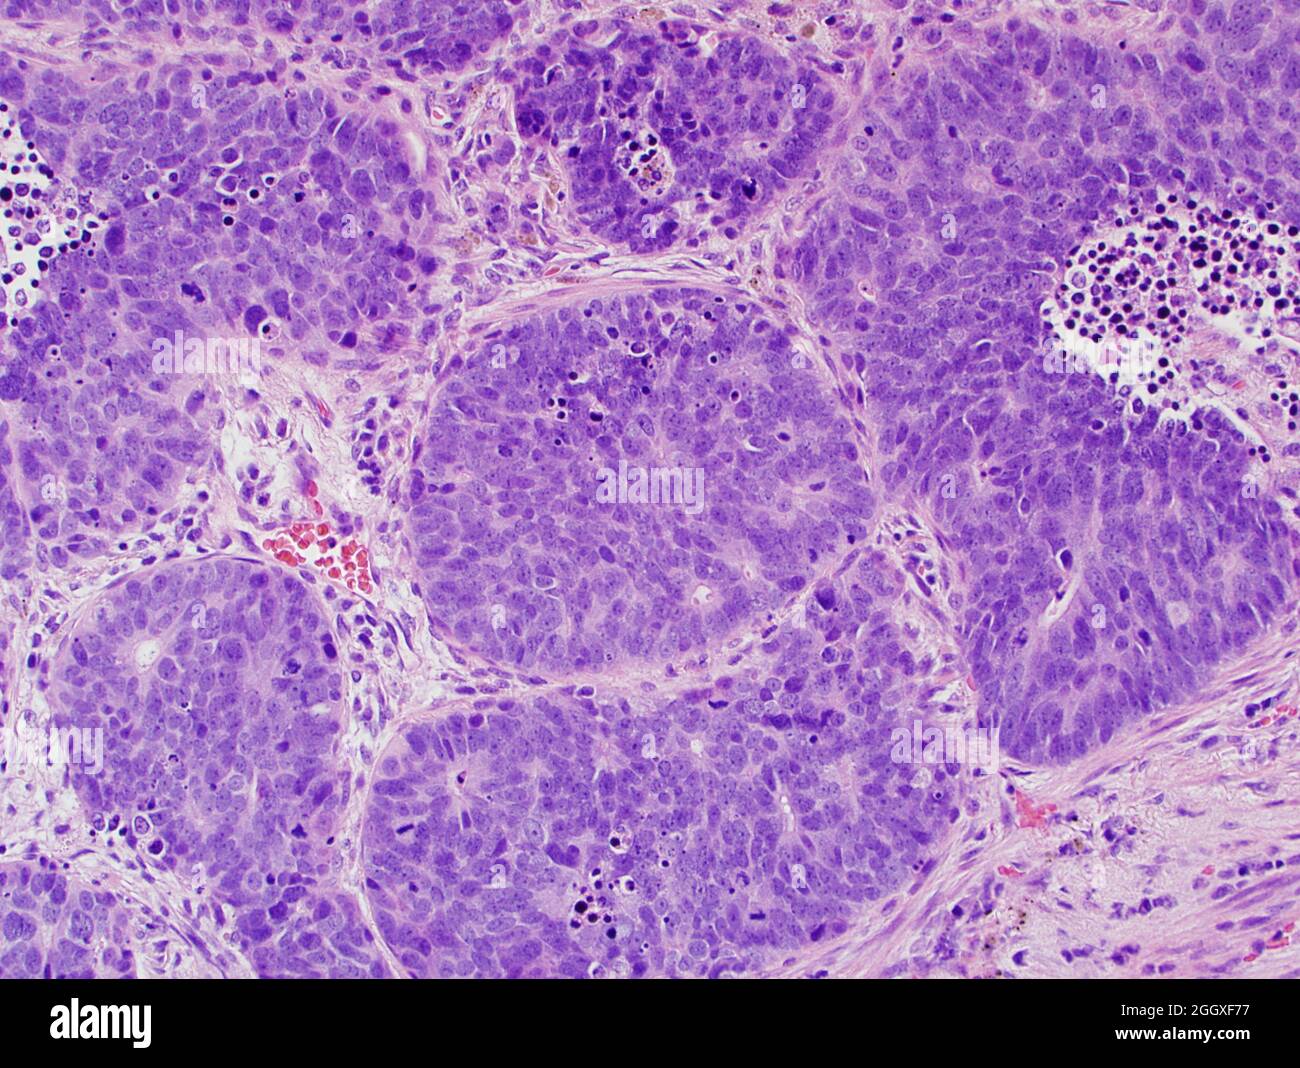 Lung Cancer Large Cell Neuroendocrine Carcinoma Stock Photo Alamy